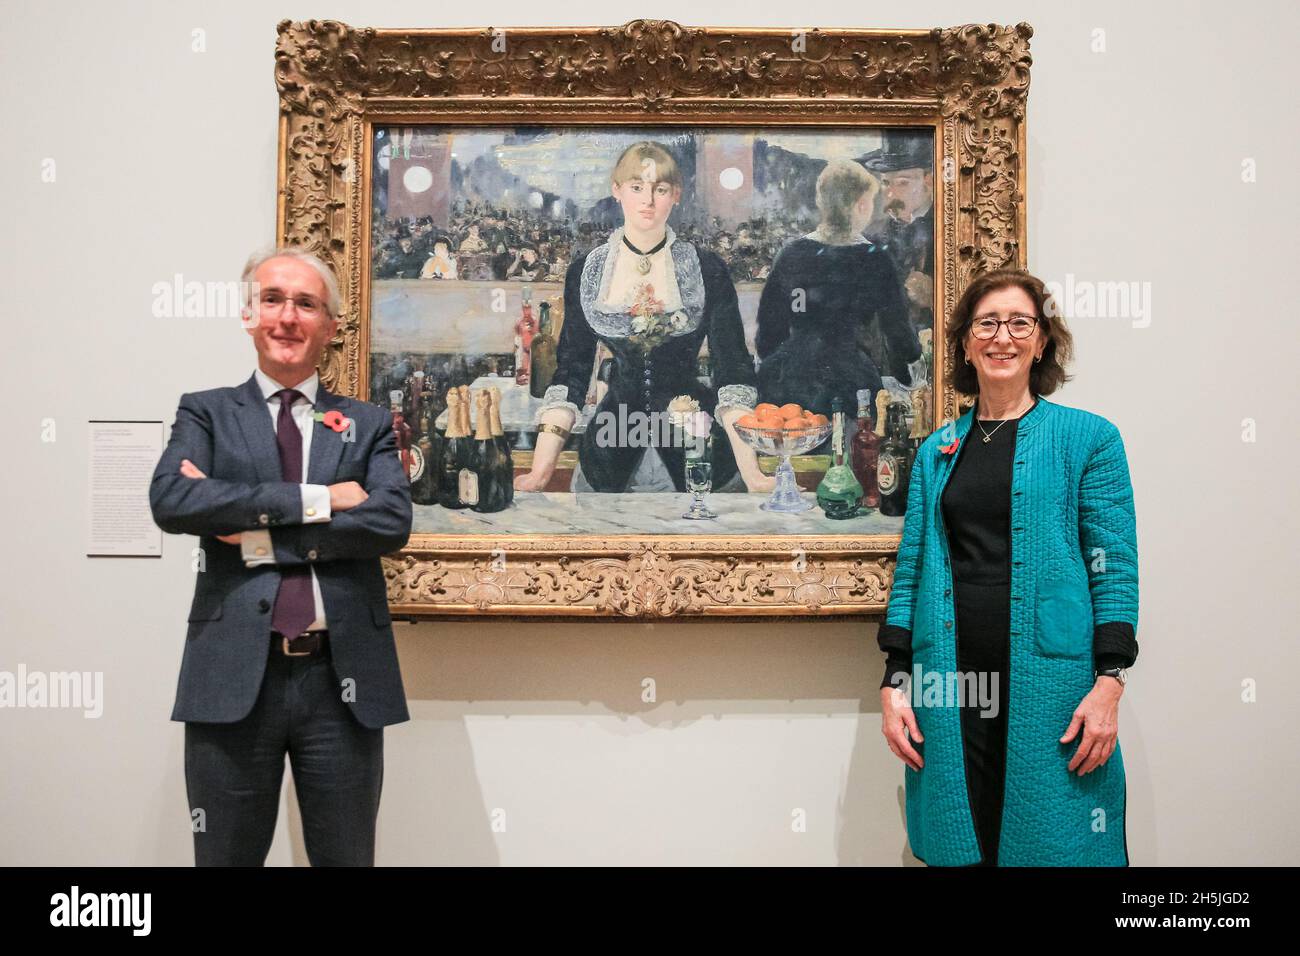 London, UK. 10th Nov, 2021. The Directors of the Courtauld, Dr. Ernst Vegelin van Claerbergen, and Professor Deborah Swallow, with Edouard Manet's 'A Bar at the Folies-Bergere', (1882). The Courtauld Gallery at Somerset House in London will re-open to the public on Friday 19 November following the most significant modernisation project in its history, providing a transformed home for one of the UK's greatest art collections. Credit: Imageplotter/Alamy Live News Credit: Imageplotter/Alamy Live News Stock Photo